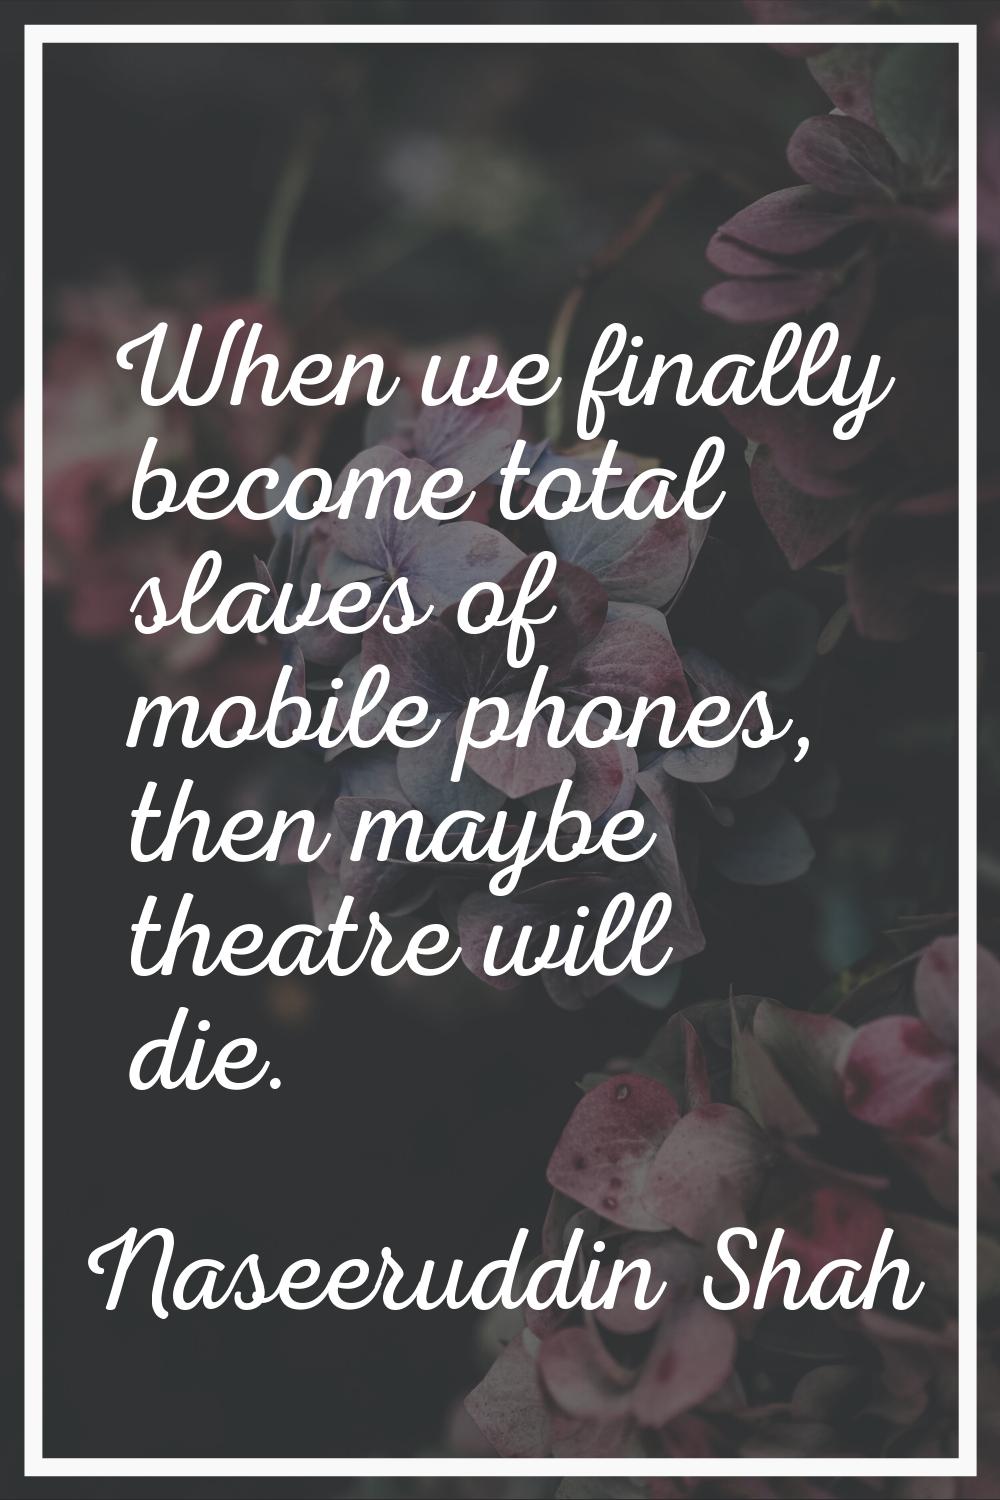 When we finally become total slaves of mobile phones, then maybe theatre will die.